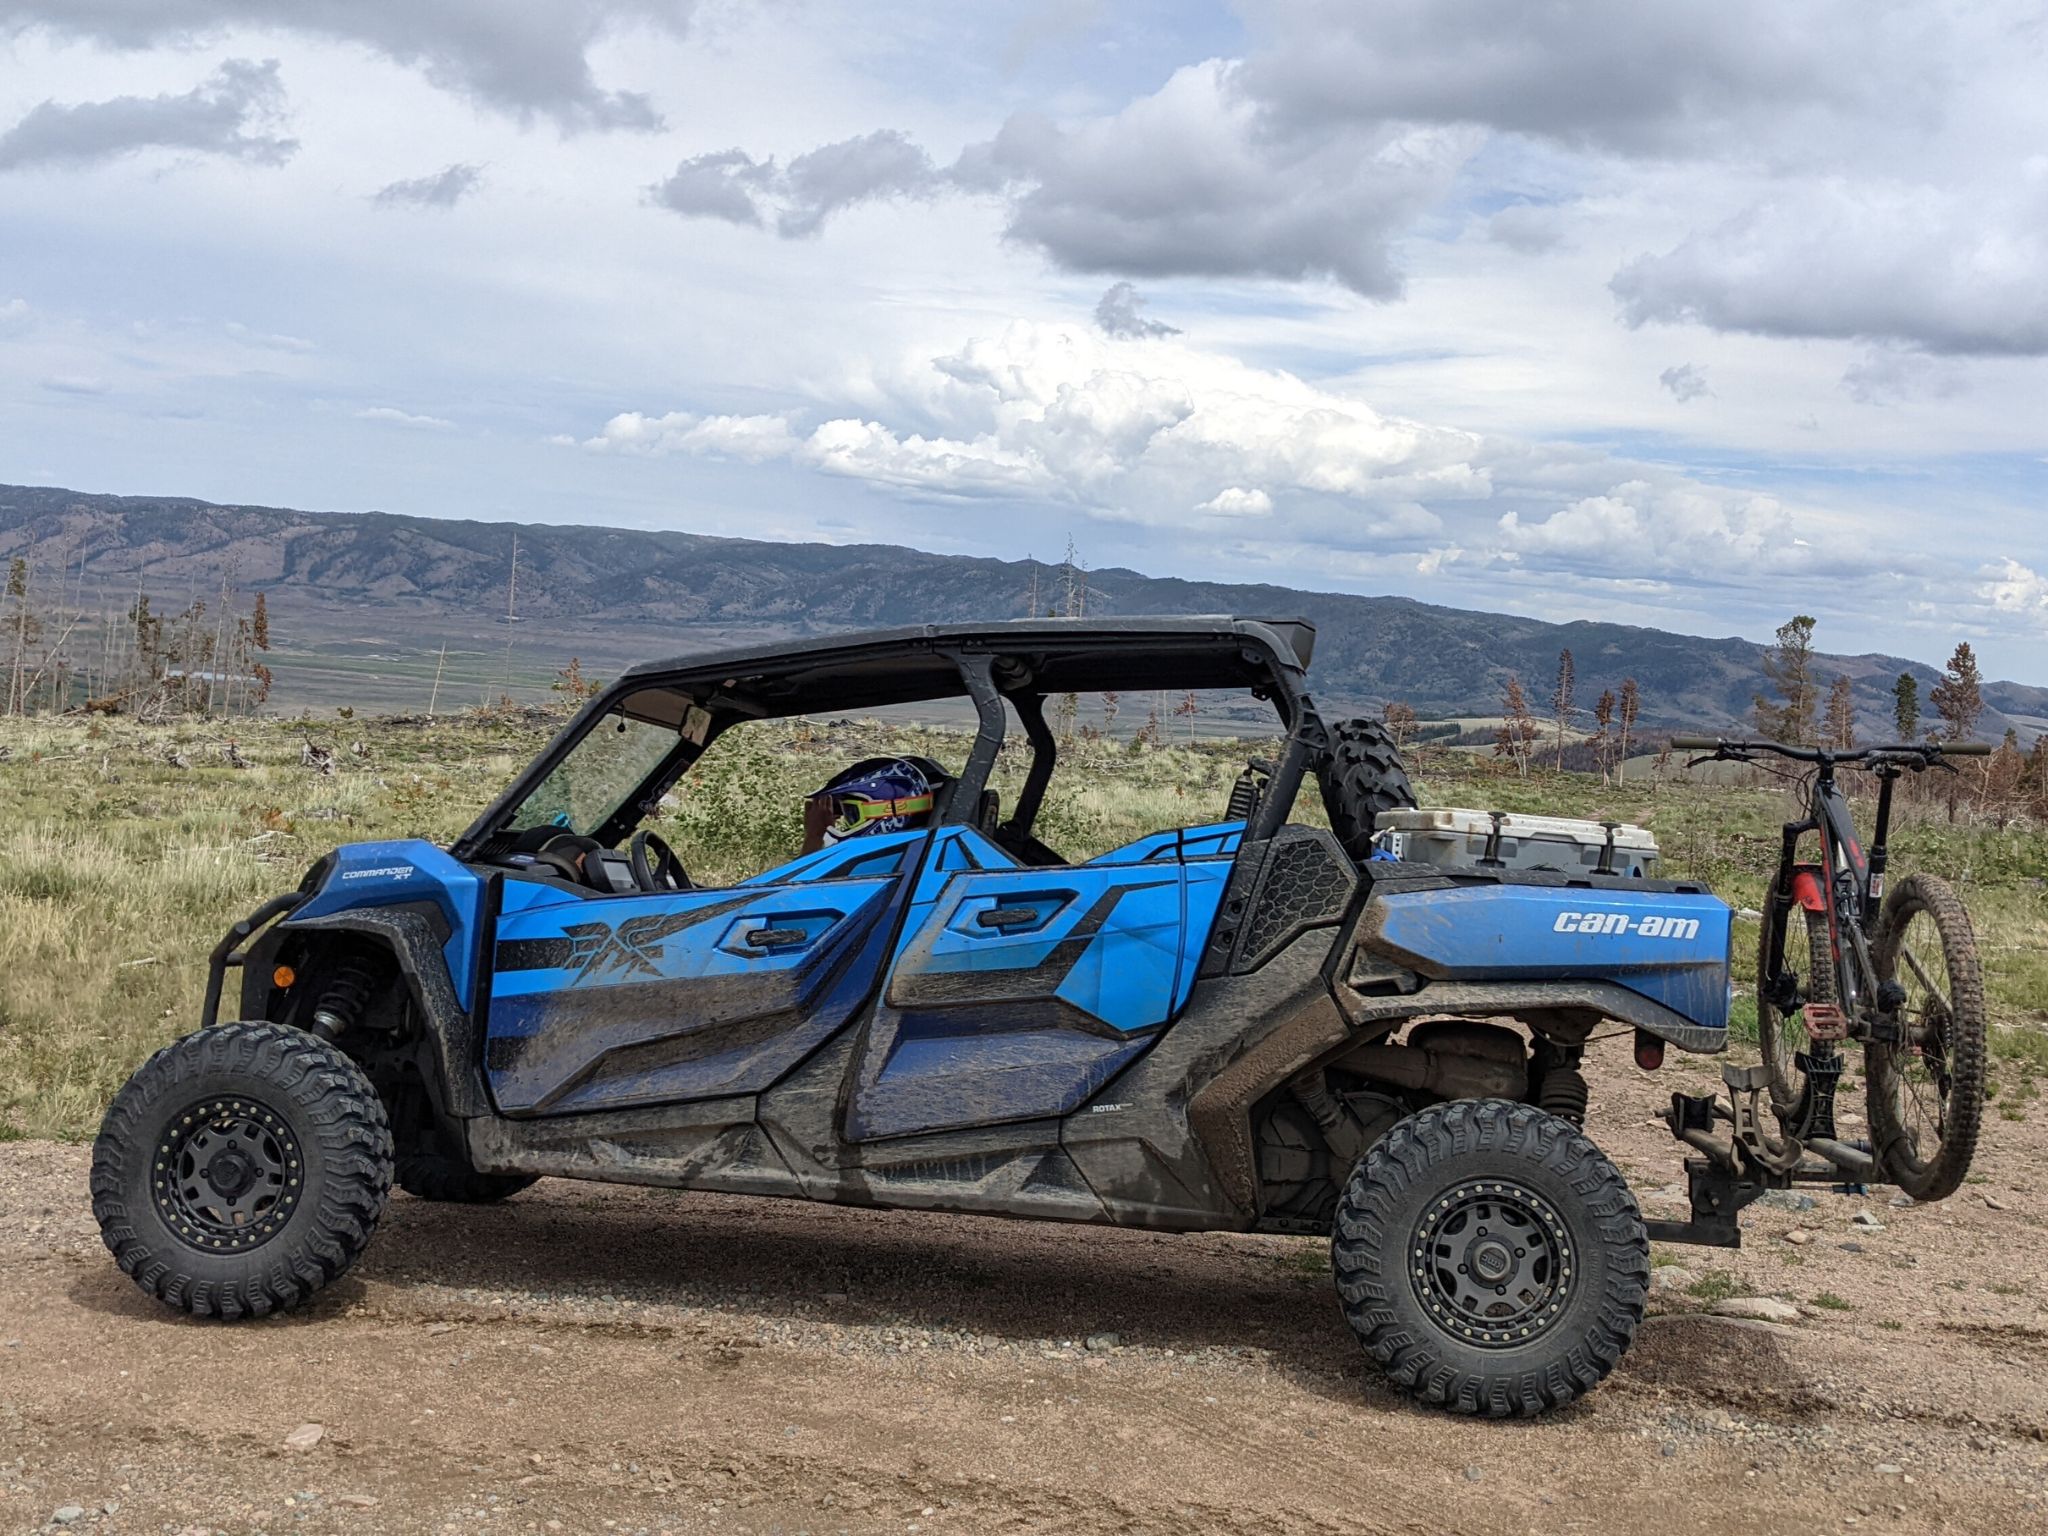 The thrill of riding an UTV way off‑road outside Laramie, WY